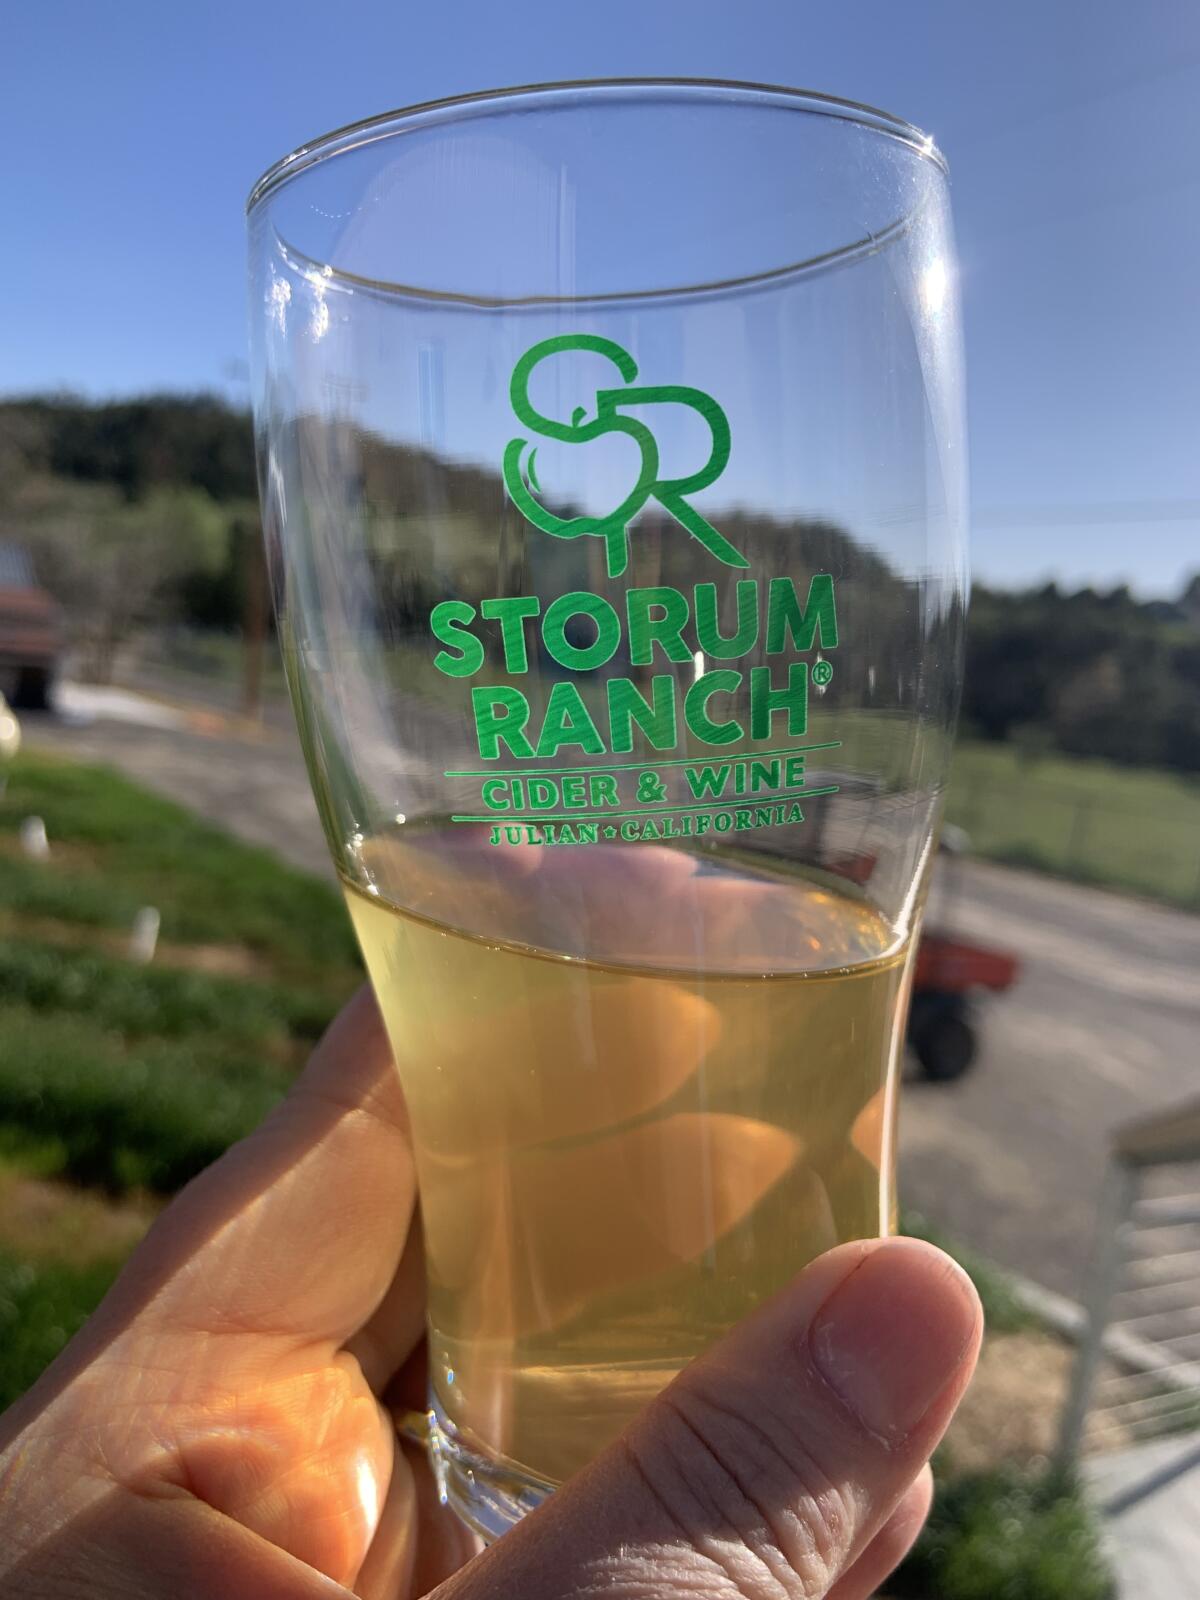 A close-up of a half glass of cider with a Storum Ranch label on the glass